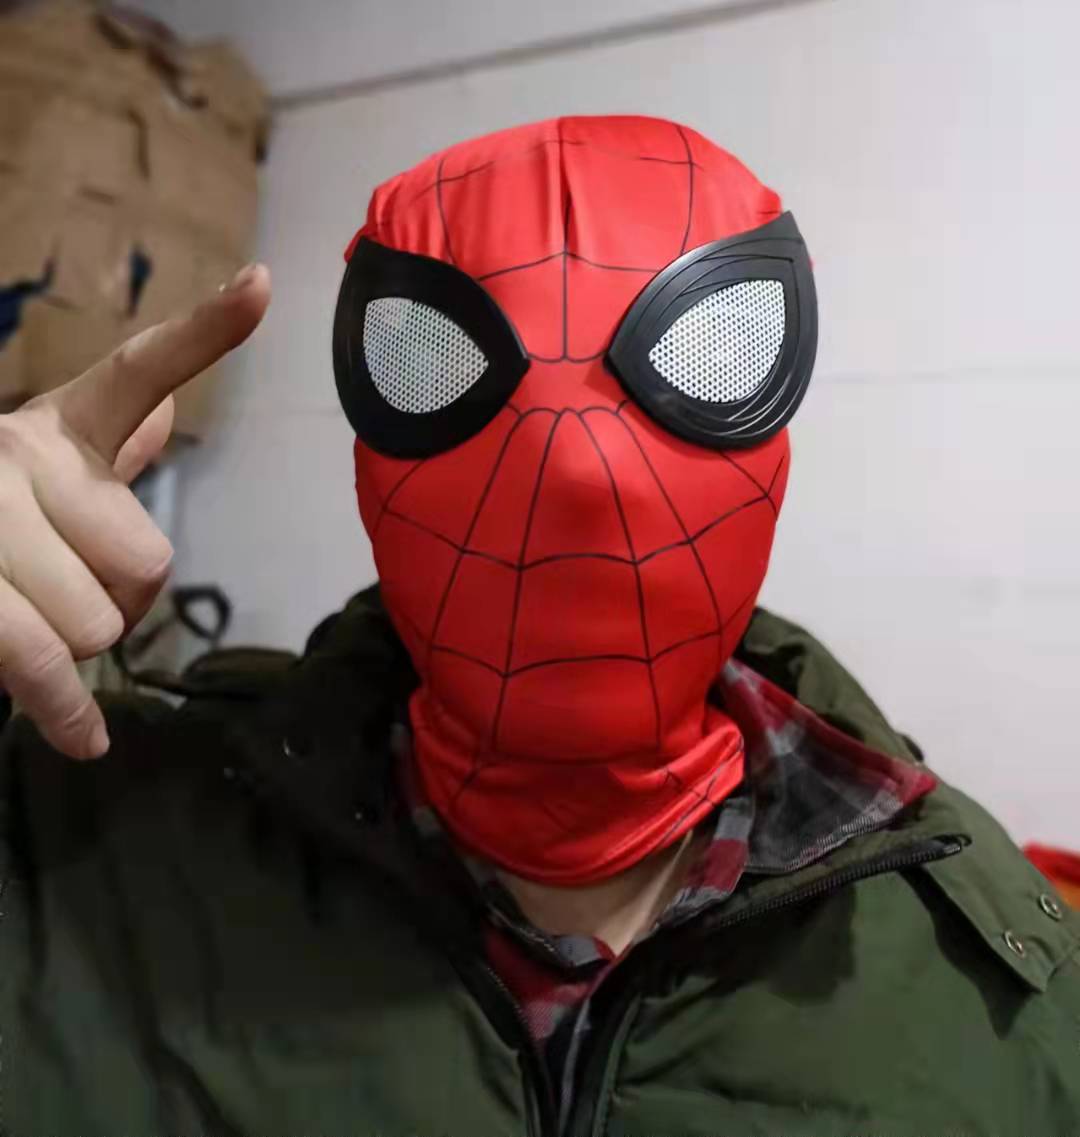 Douyin same Spider-Man hood for adults and children cute funny mask hood mask funny Spider-Man hood